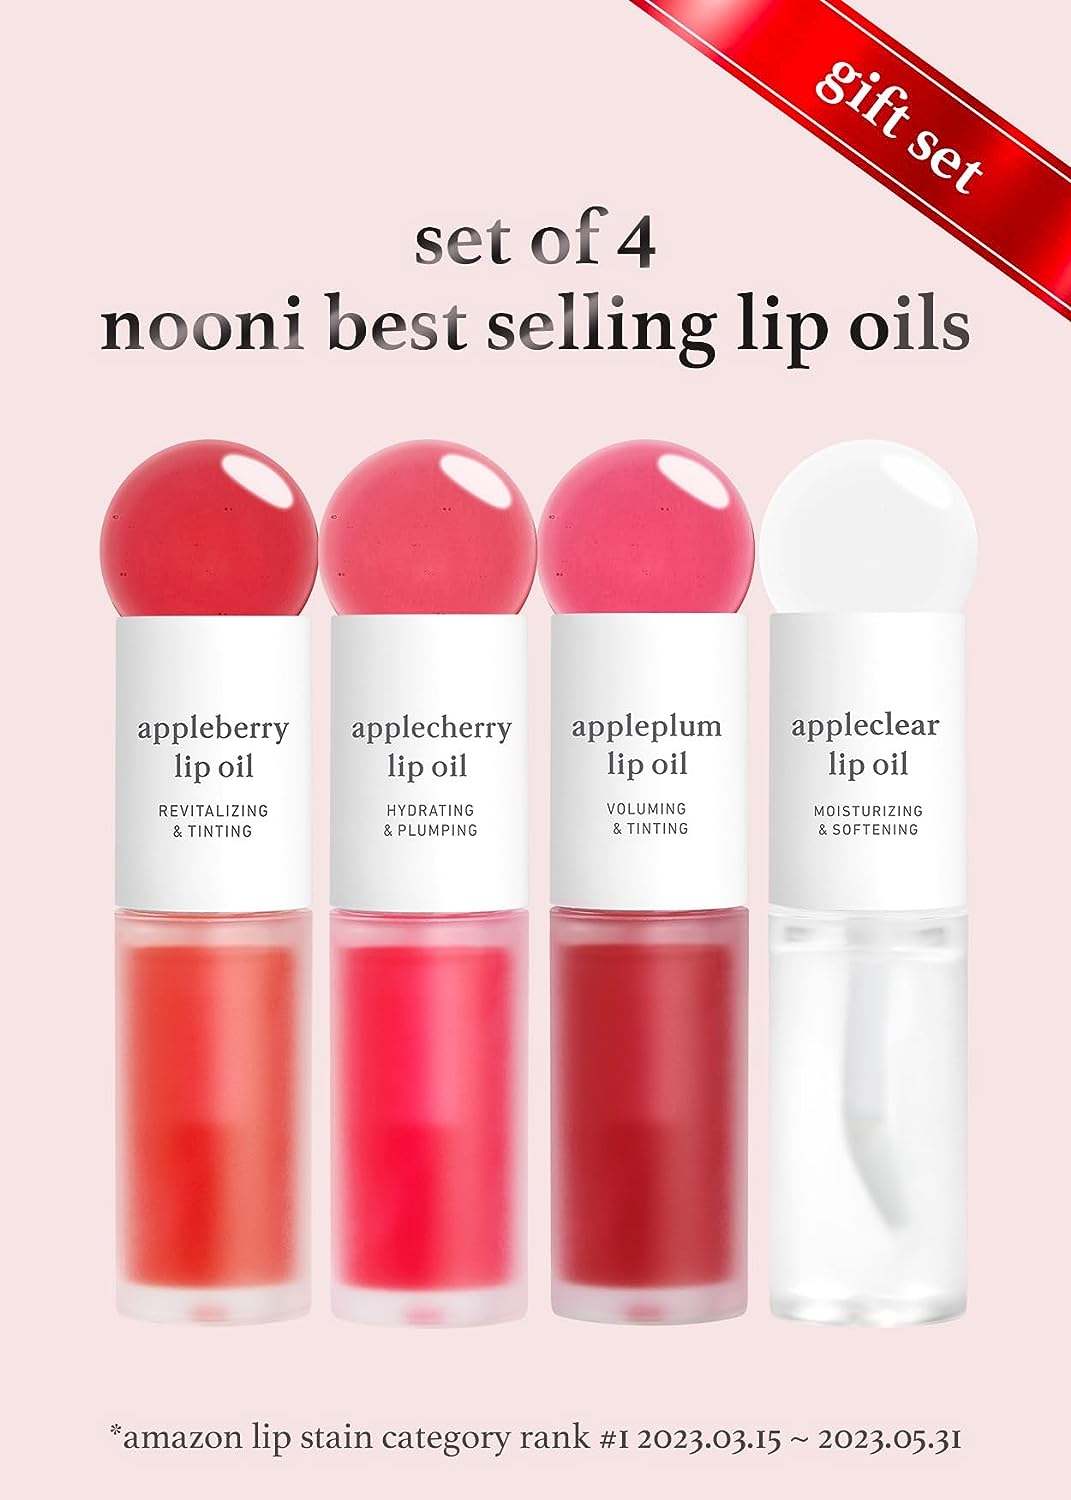 appleseed lip oil gift set with gift box and card